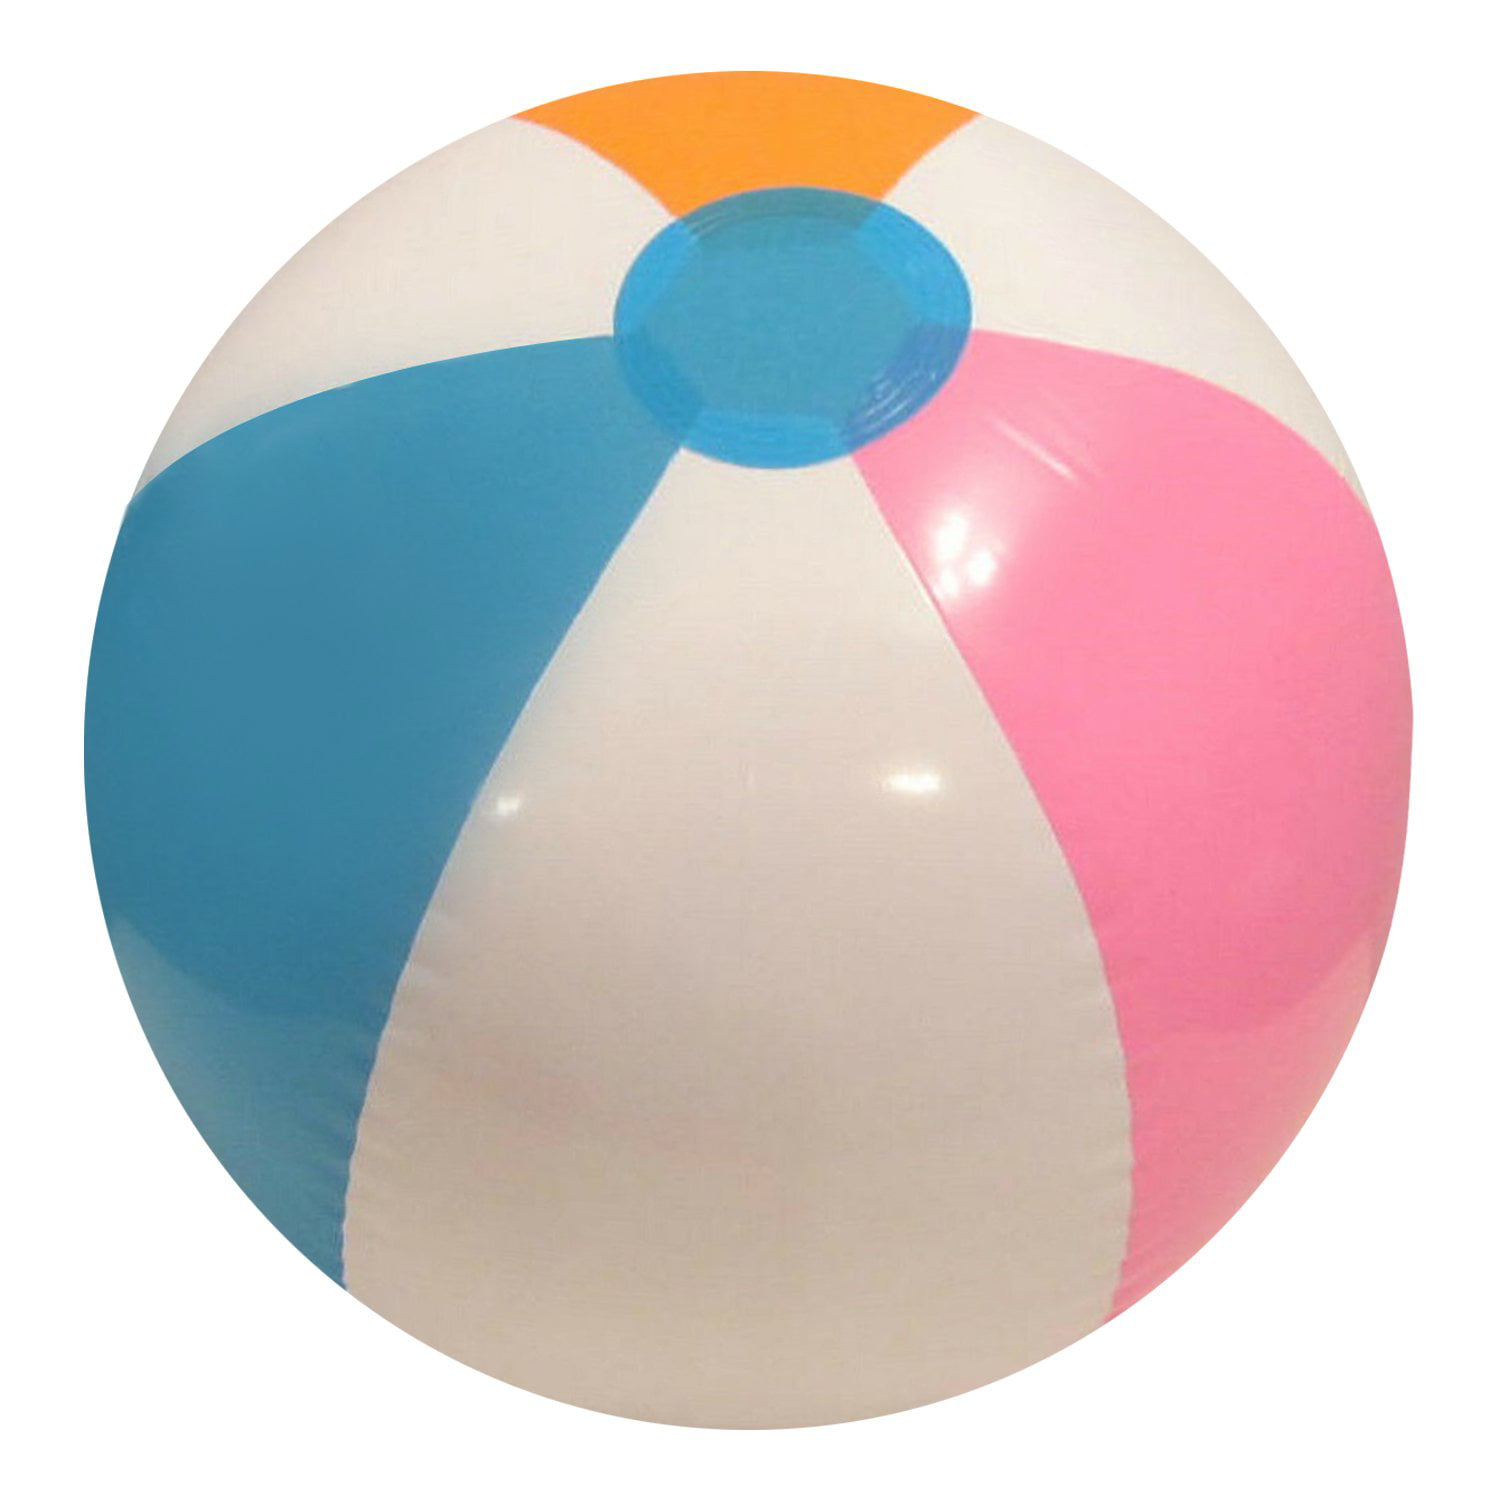 Details about   Inflatable 16" & 24" Beach Ball Select From Dropdown 